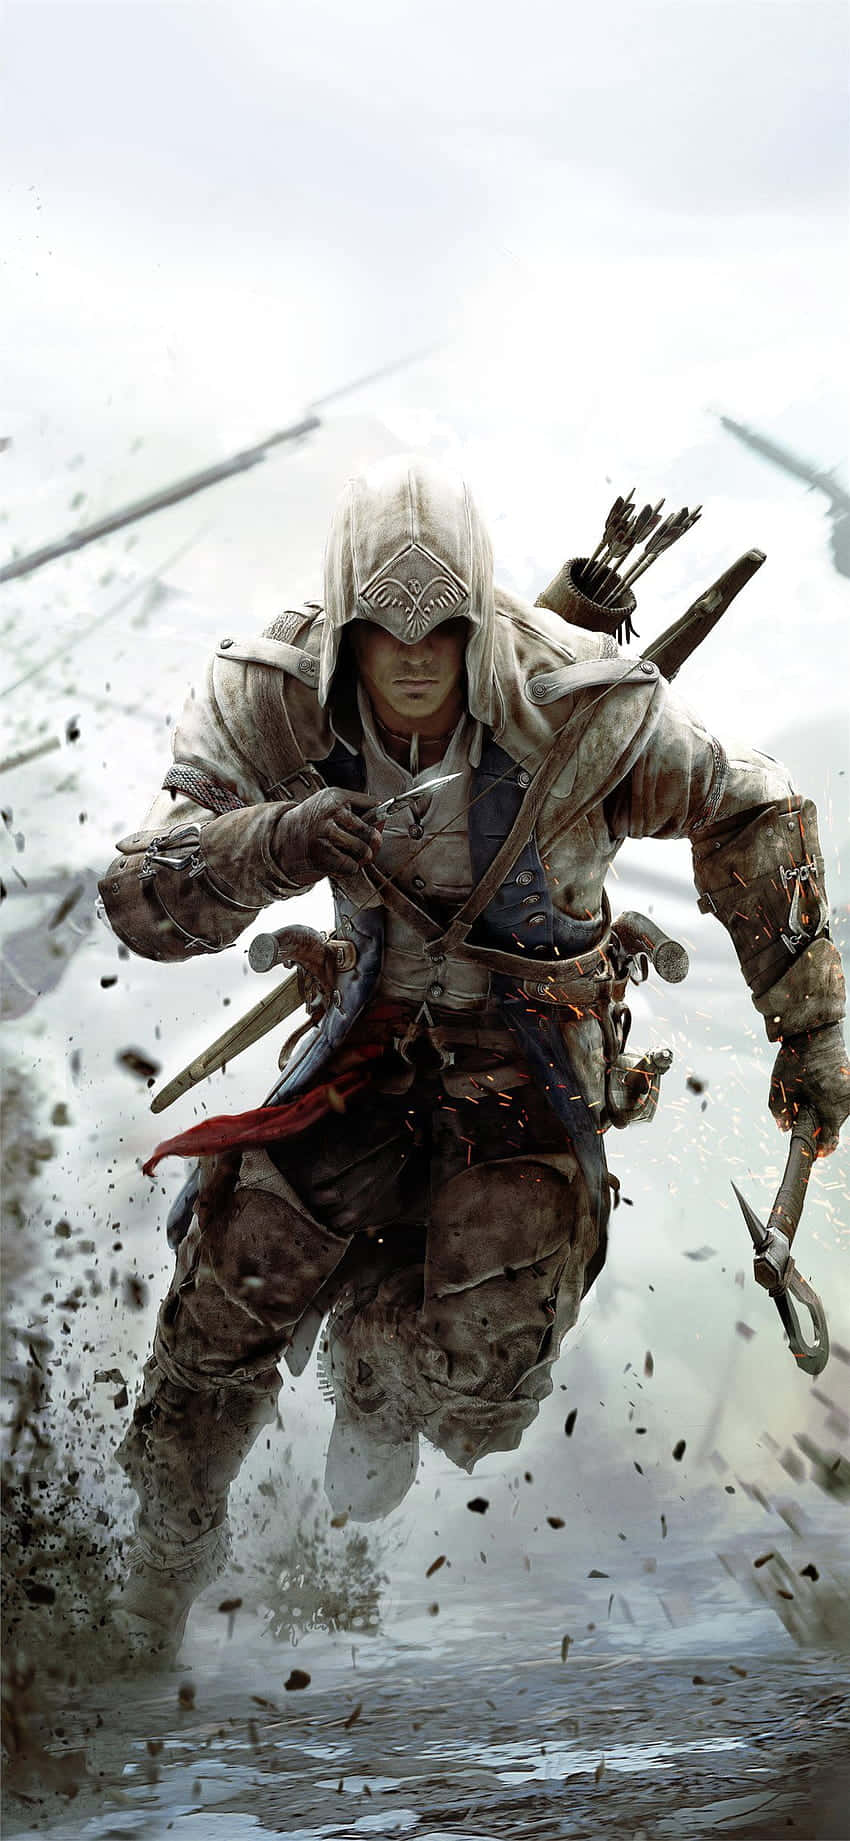 Explore the World of Assassin's Creed Valhalla with iPhone X